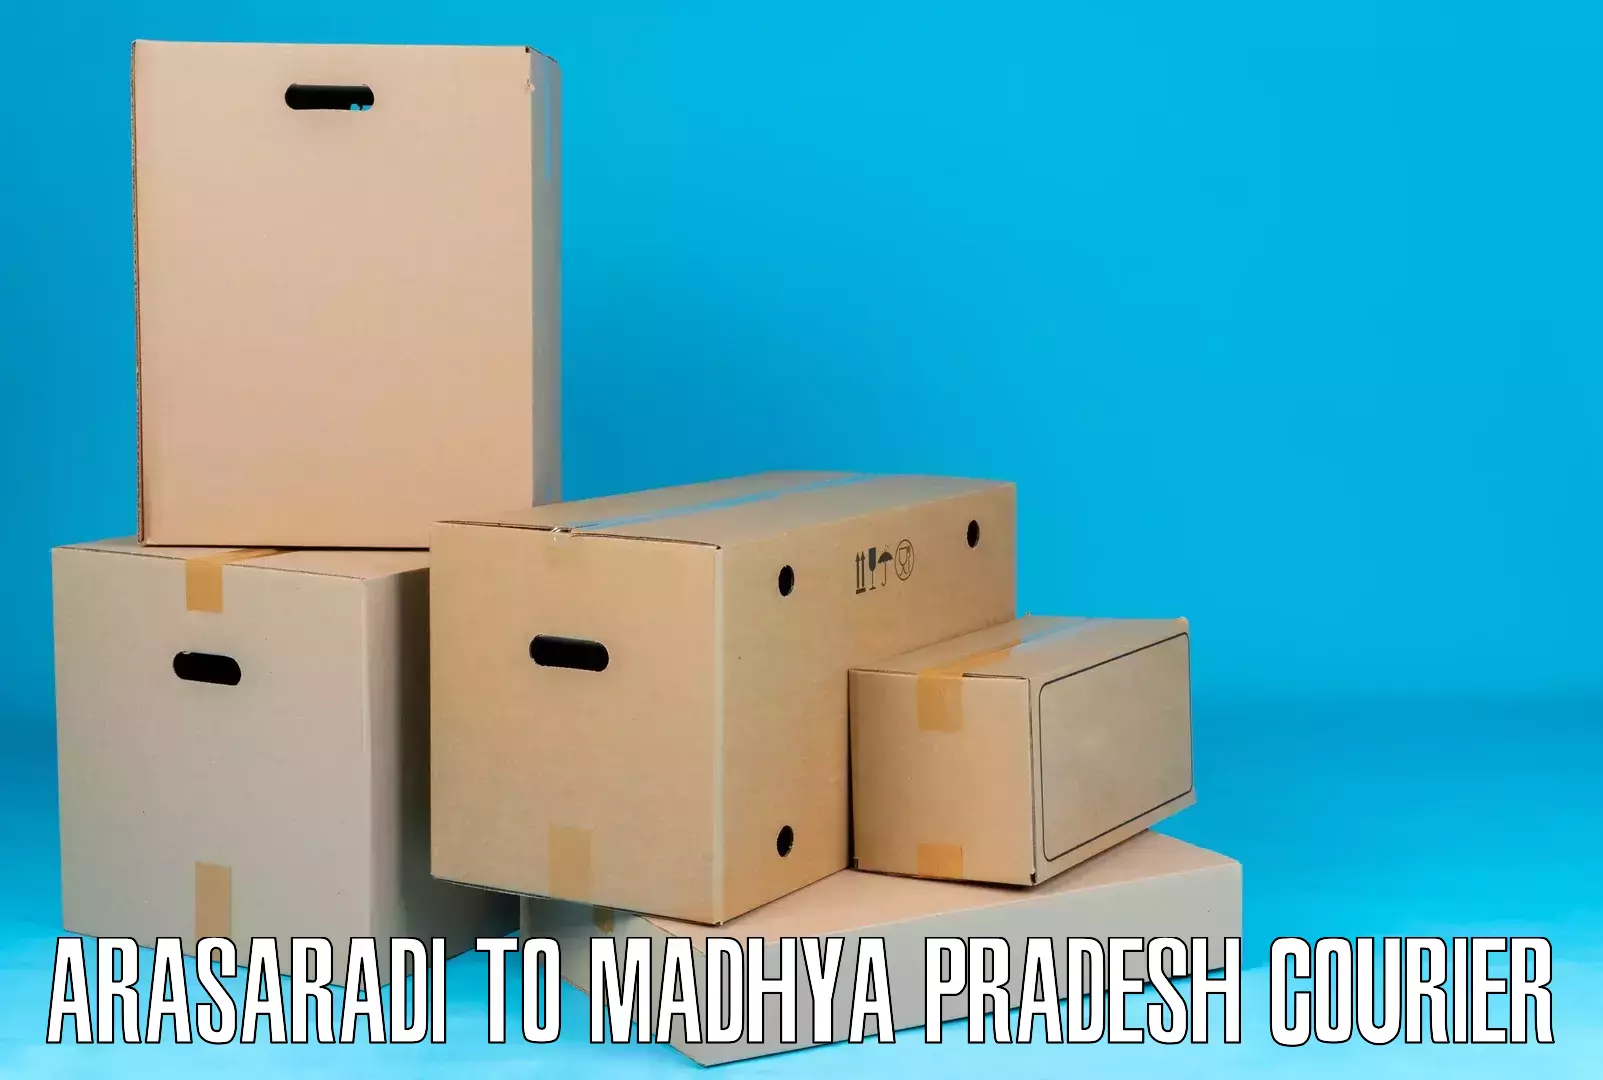 High value parcel delivery Arasaradi to Sidhi